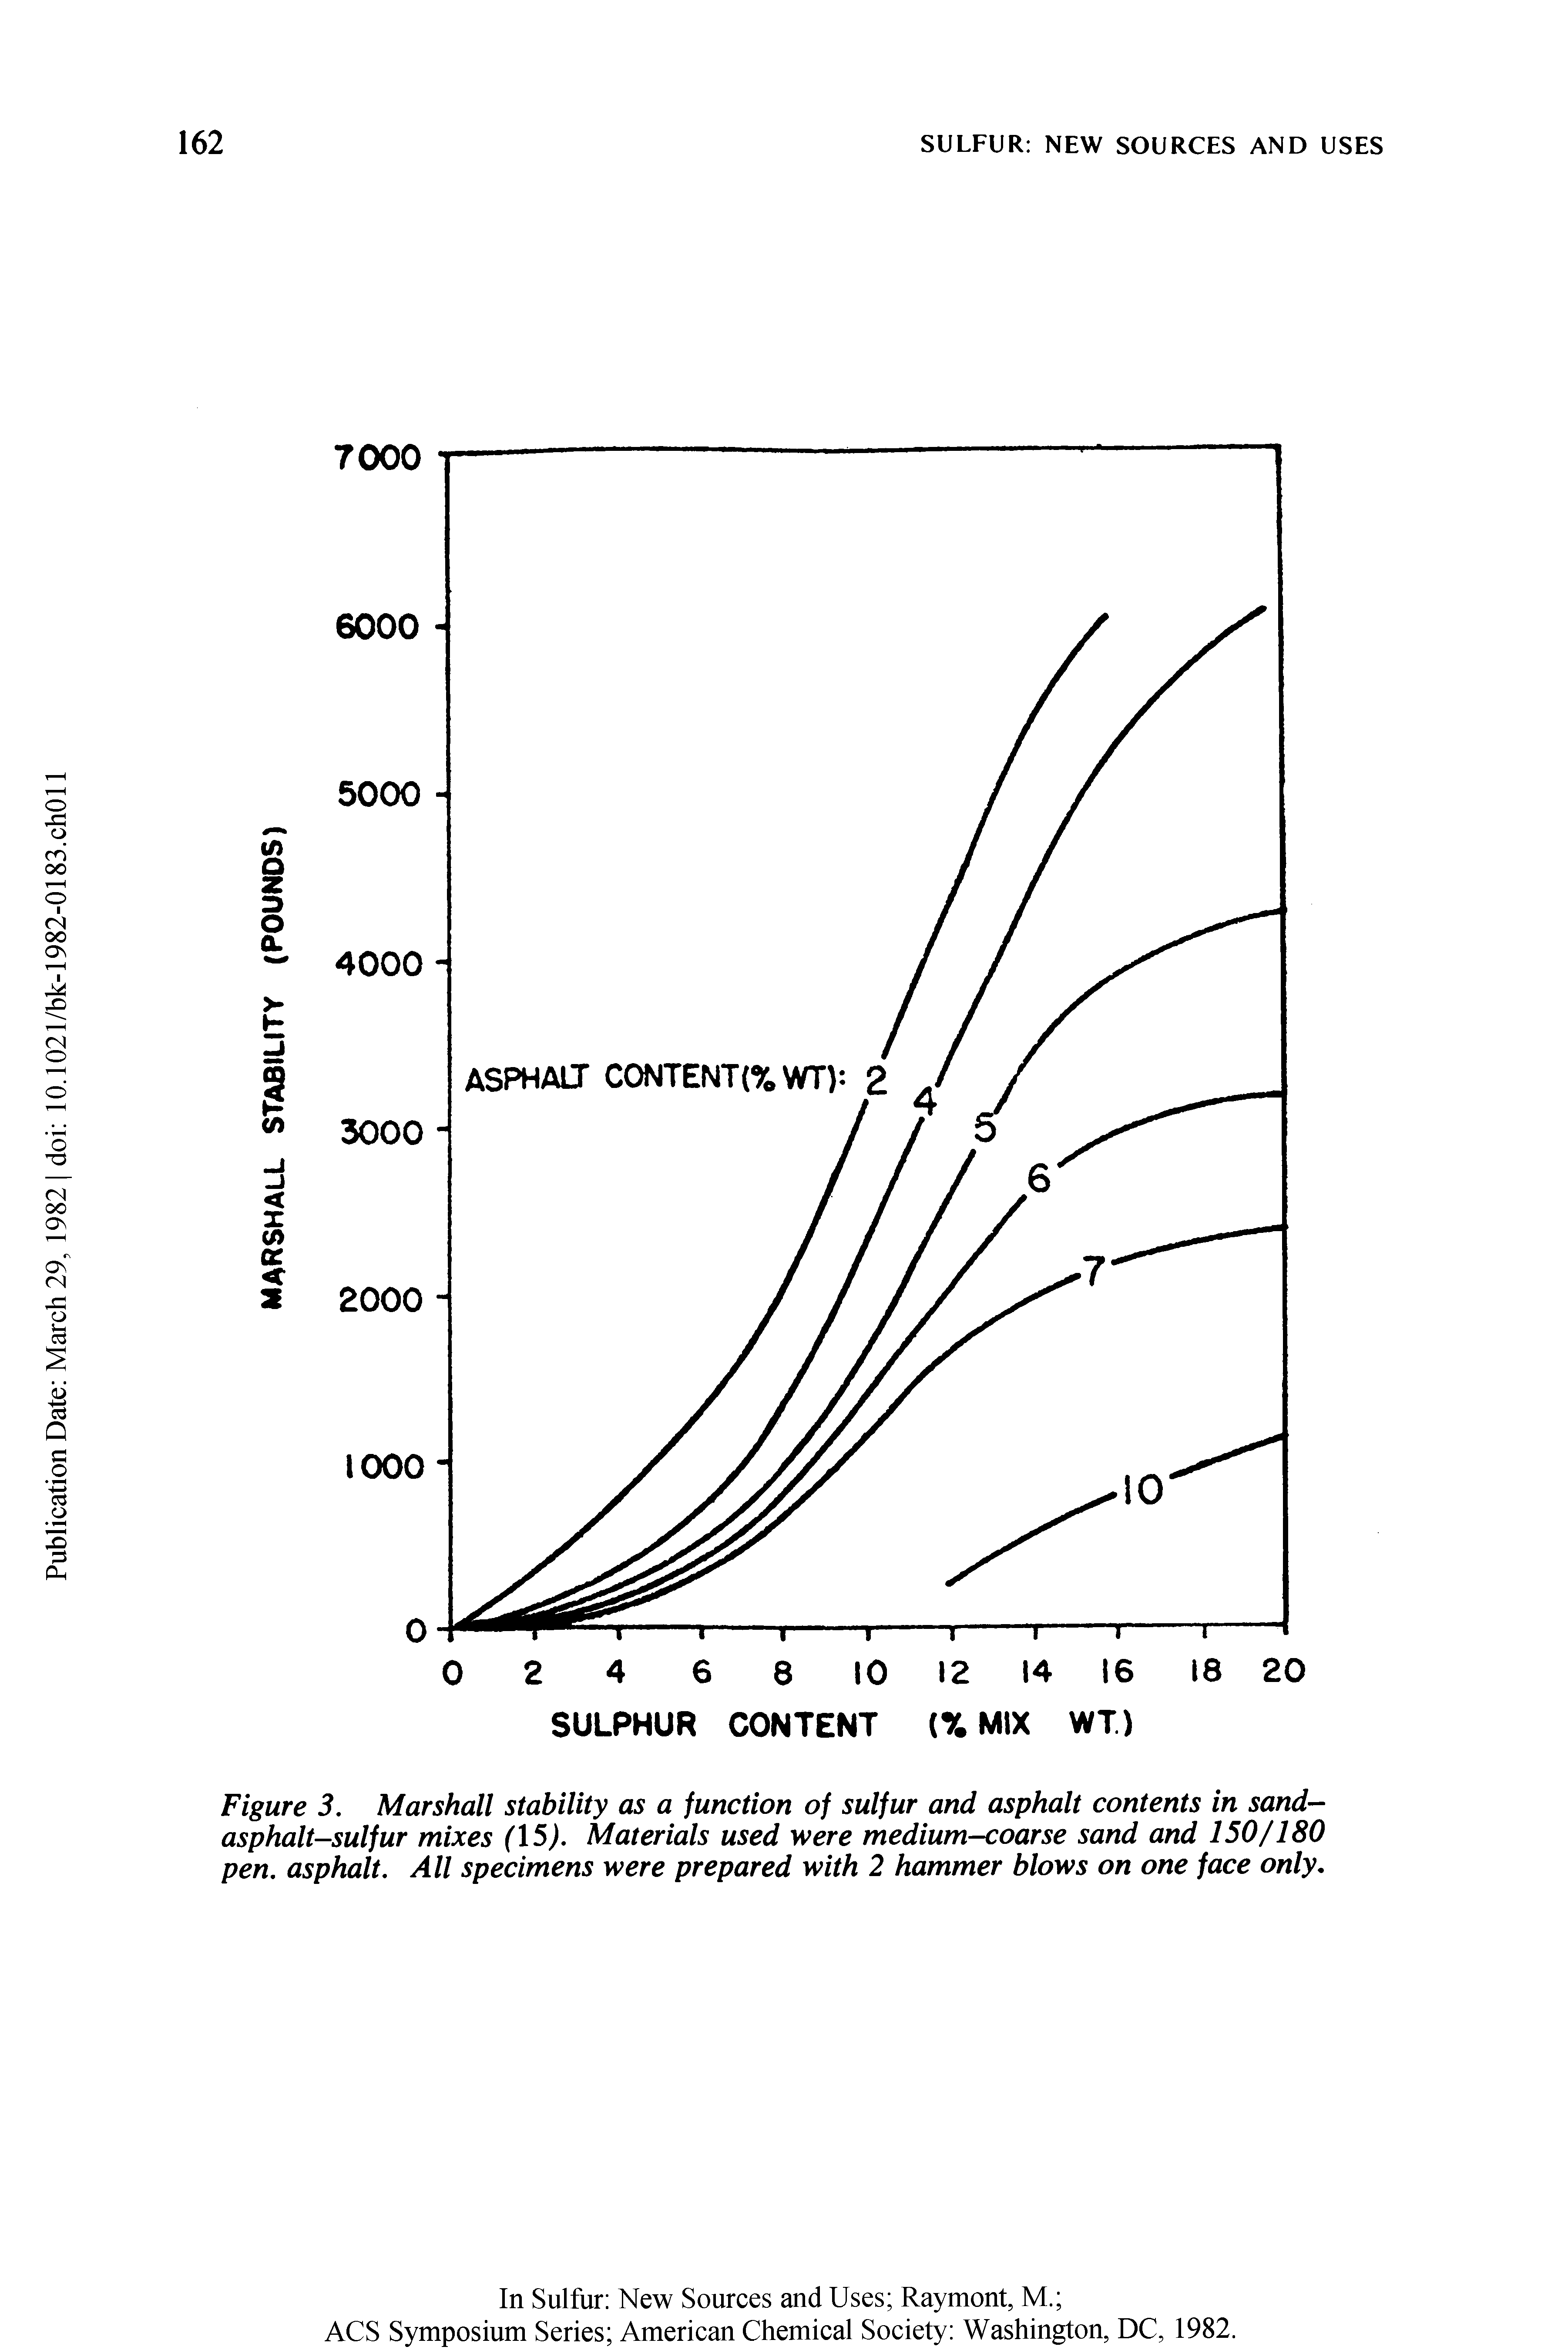 Figure 3. Marshall stability as a function of sulfur and asphalt contents in sand-asphalt-sulfur mixes (15,). Materials used were medium-coarse sand and 150/180 pen. asphalt. All specimens were prepared with 2 hammer blows on one face only.